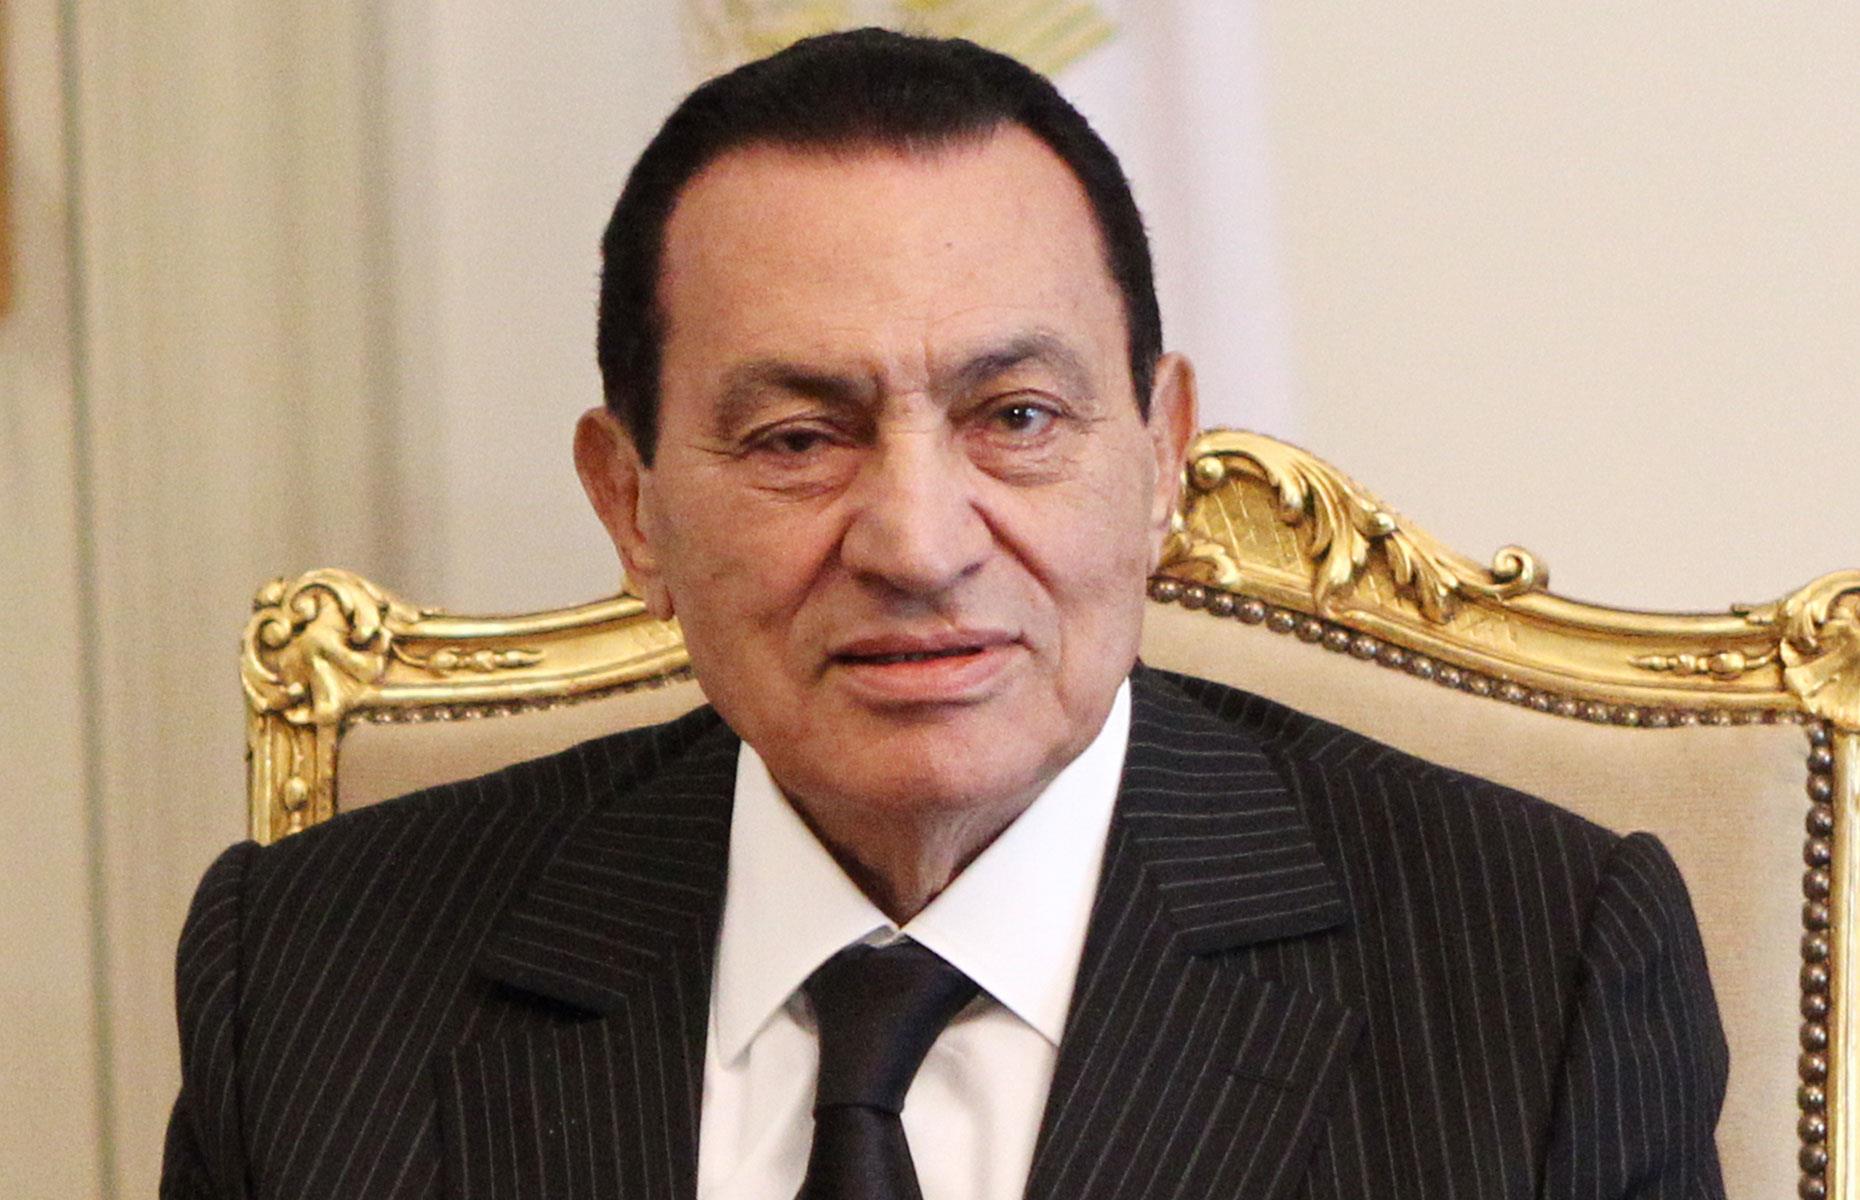 <p>Another disreputable leader who was overthrown following the Arab Spring protests, Egypt's Hosni Mubarak was removed from power in 2011 after serving 30 years as president of the country. That same year, ABC News and the <em>Guardian</em> alleged the politician had stolen $70 billion from the Egyptian people, though a report in the <em>Washington Times</em> suggests the sum could have been as much as an eye-watering $700 billion.</p>